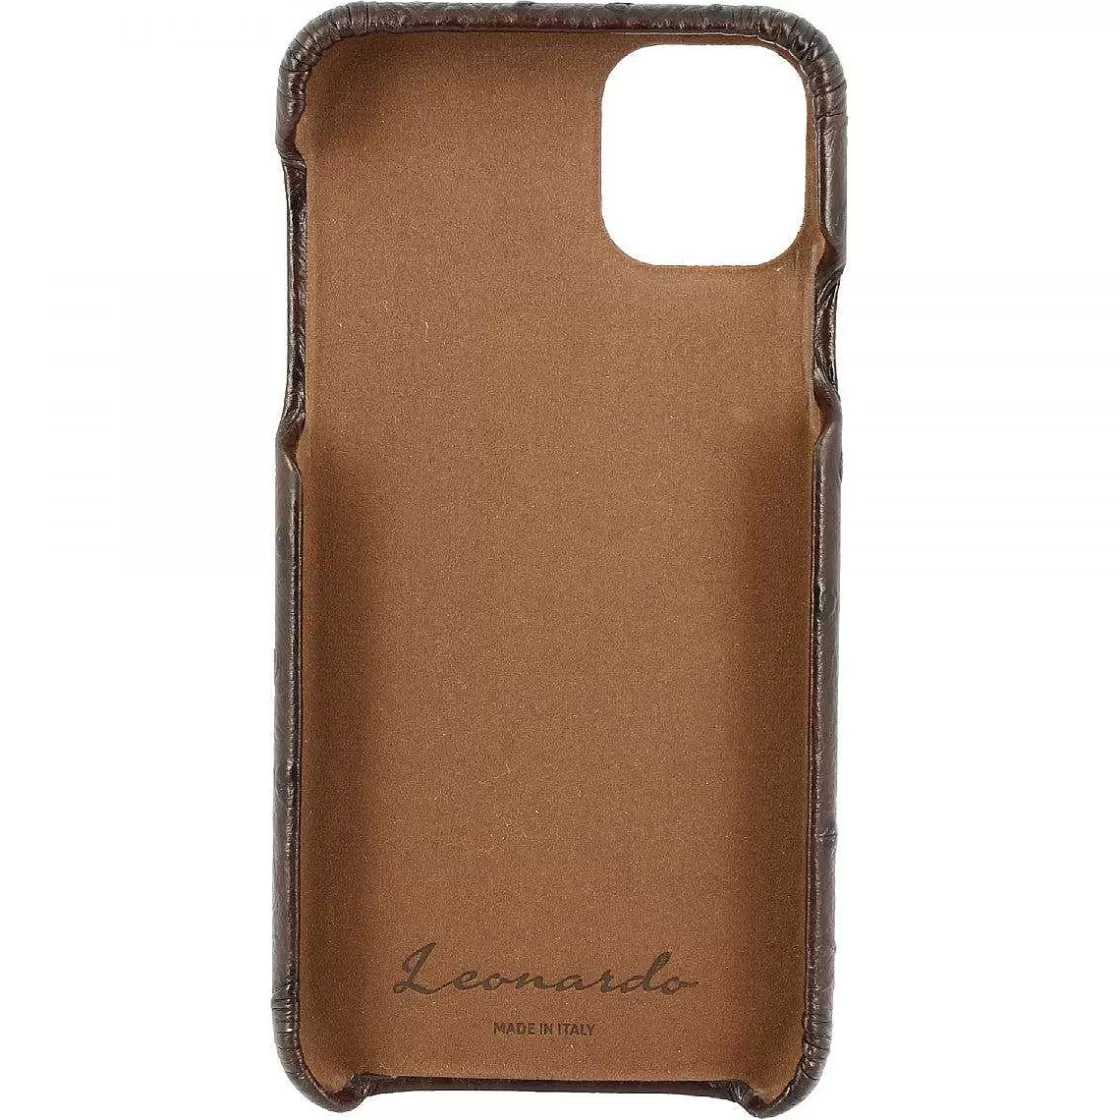 Leonardo Iphone Case In Brown Ostrich Printed Leather Best